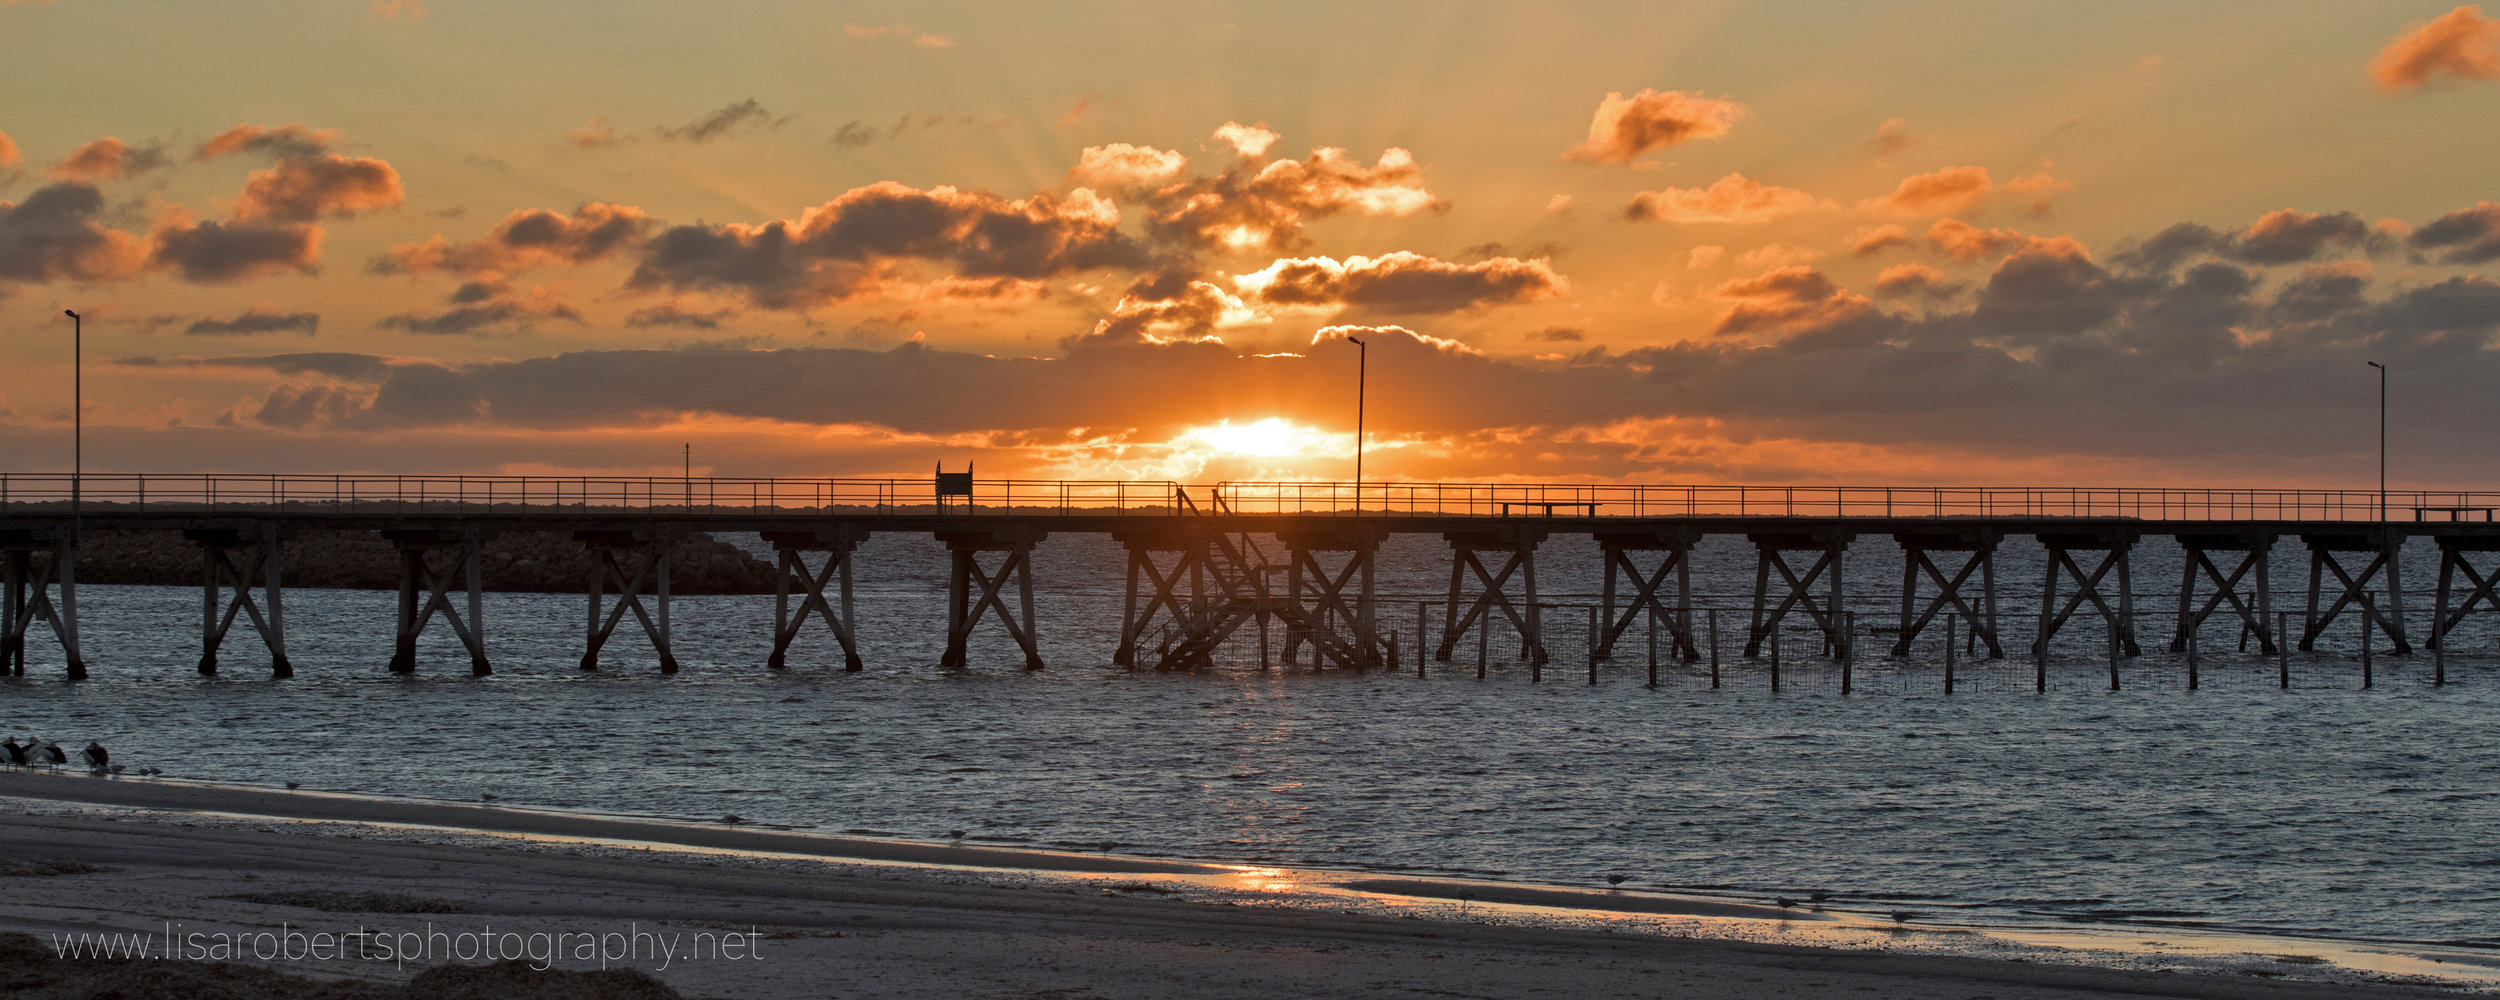  Sunset behind the pier, Smoky Bay, South Australia 